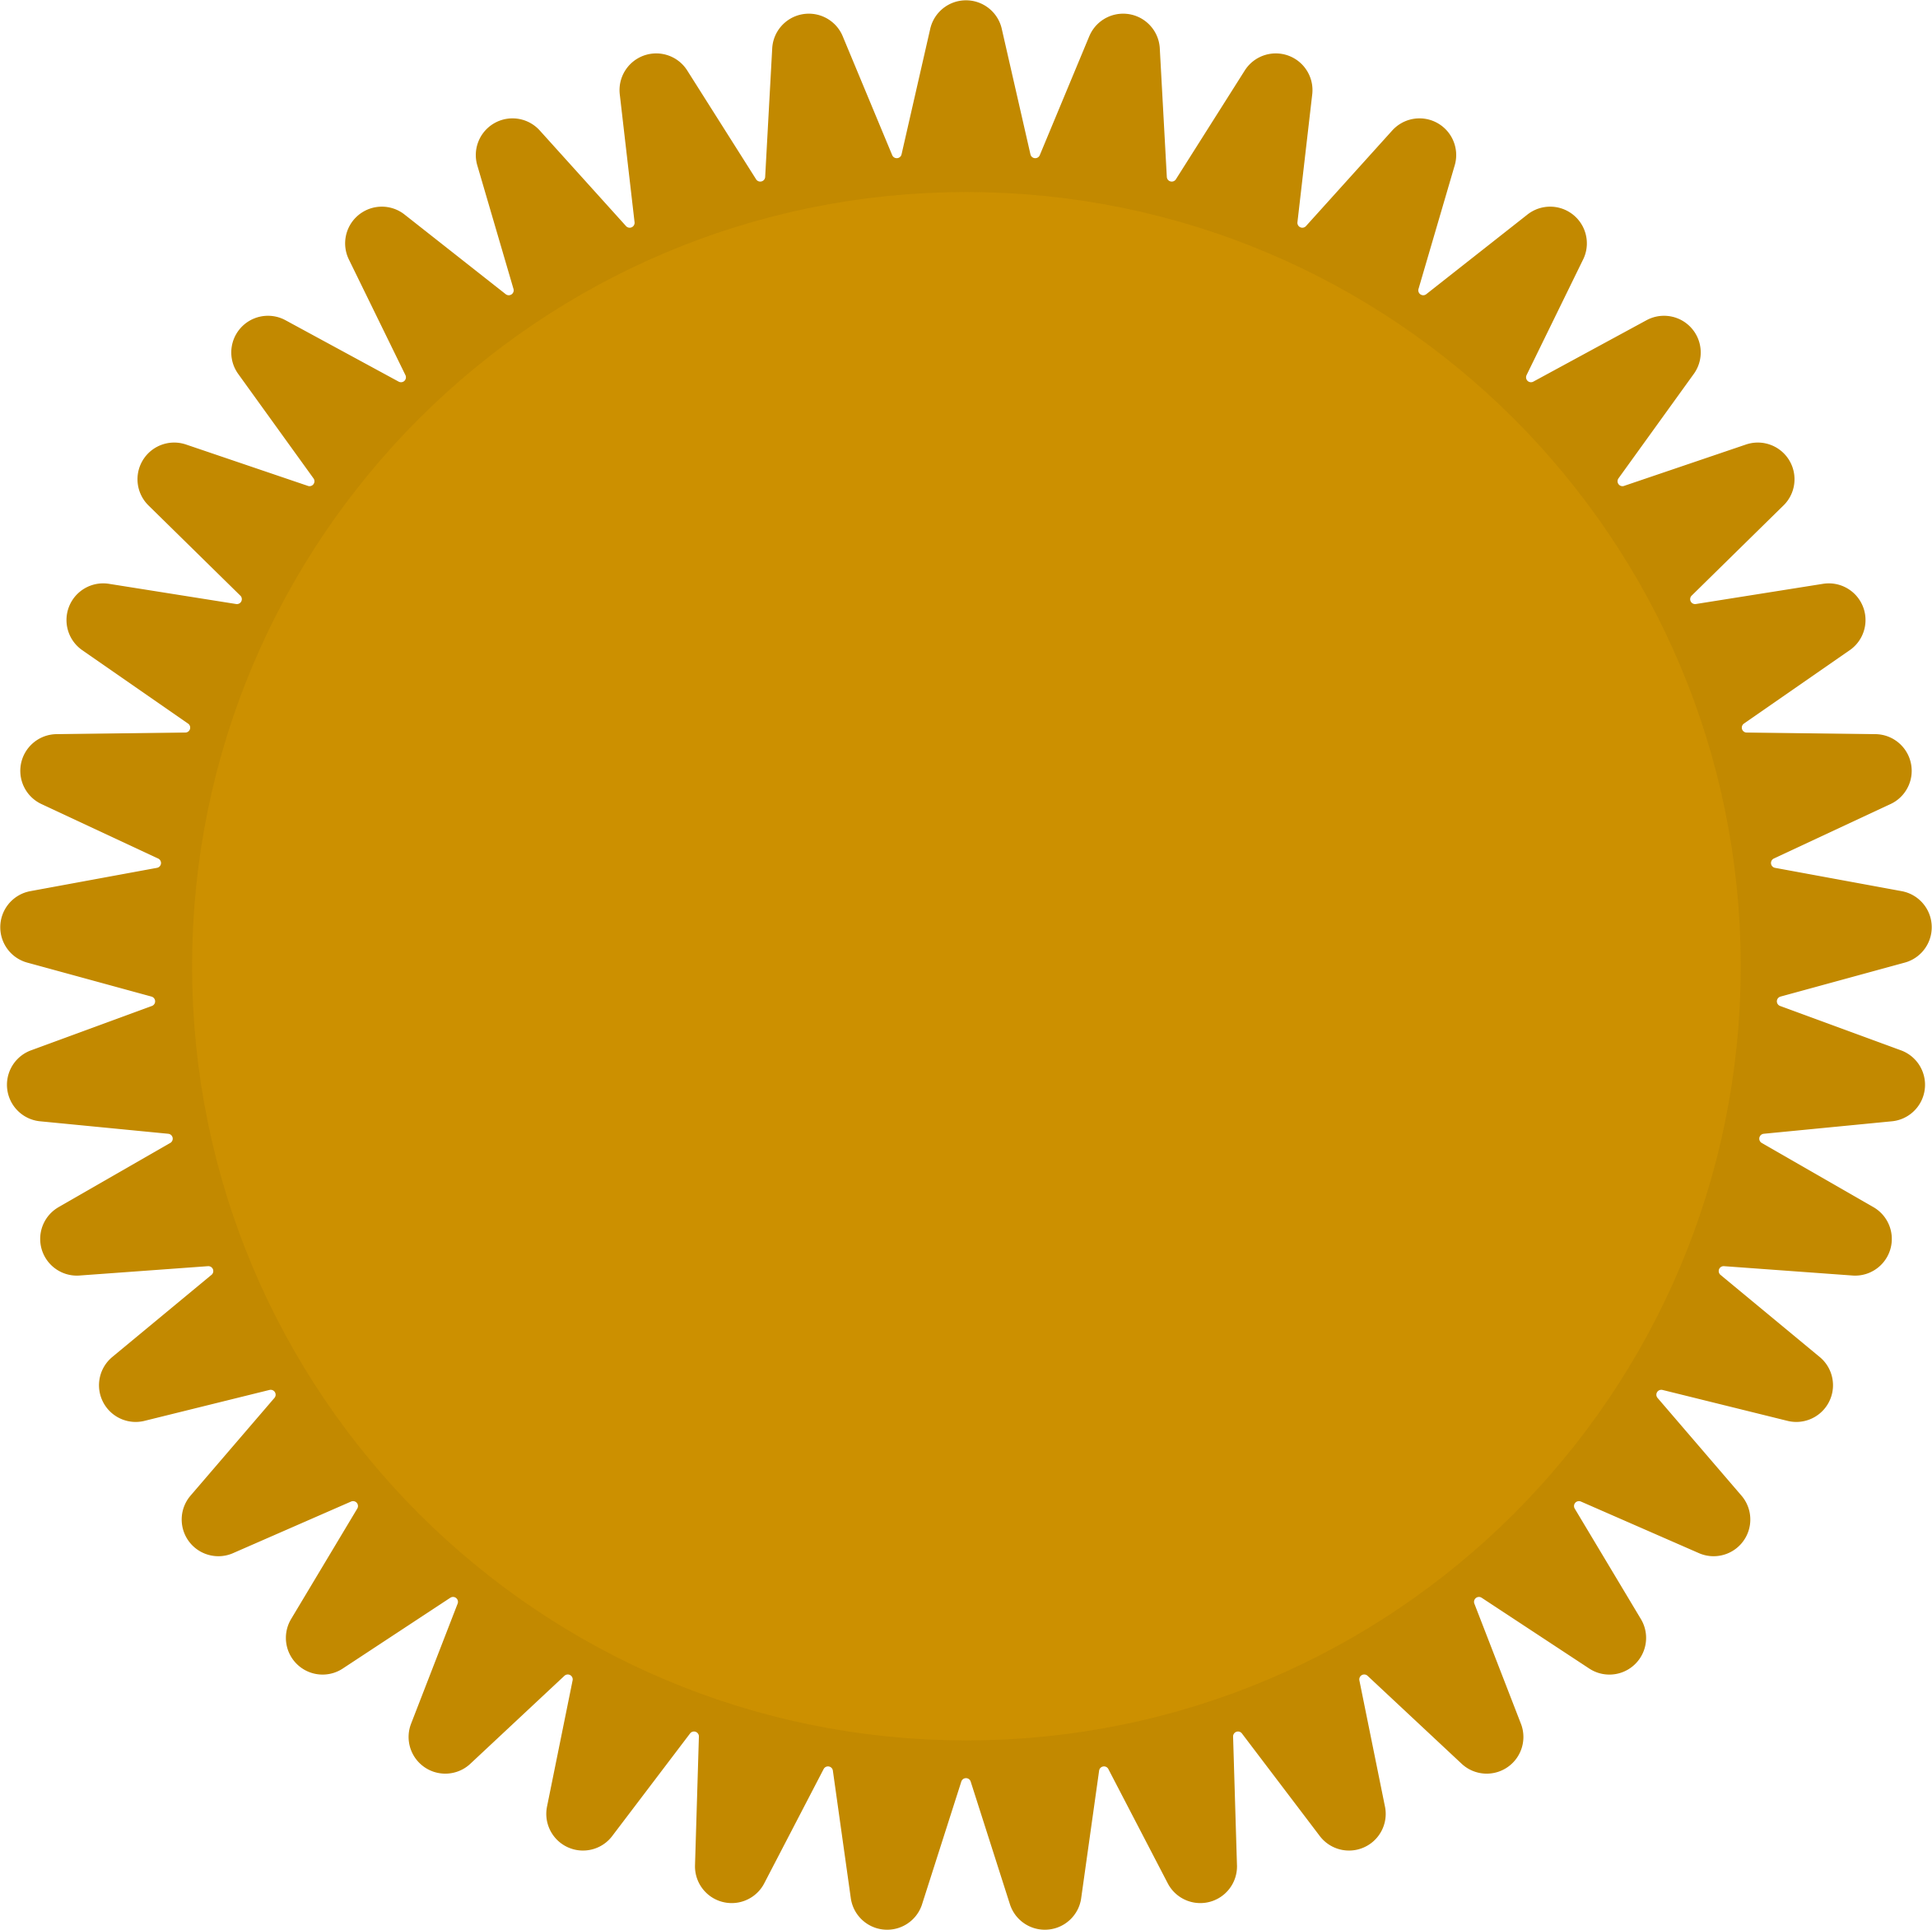 Free Gold Seal Cliparts, Download Free Clip Art, Free Clip.